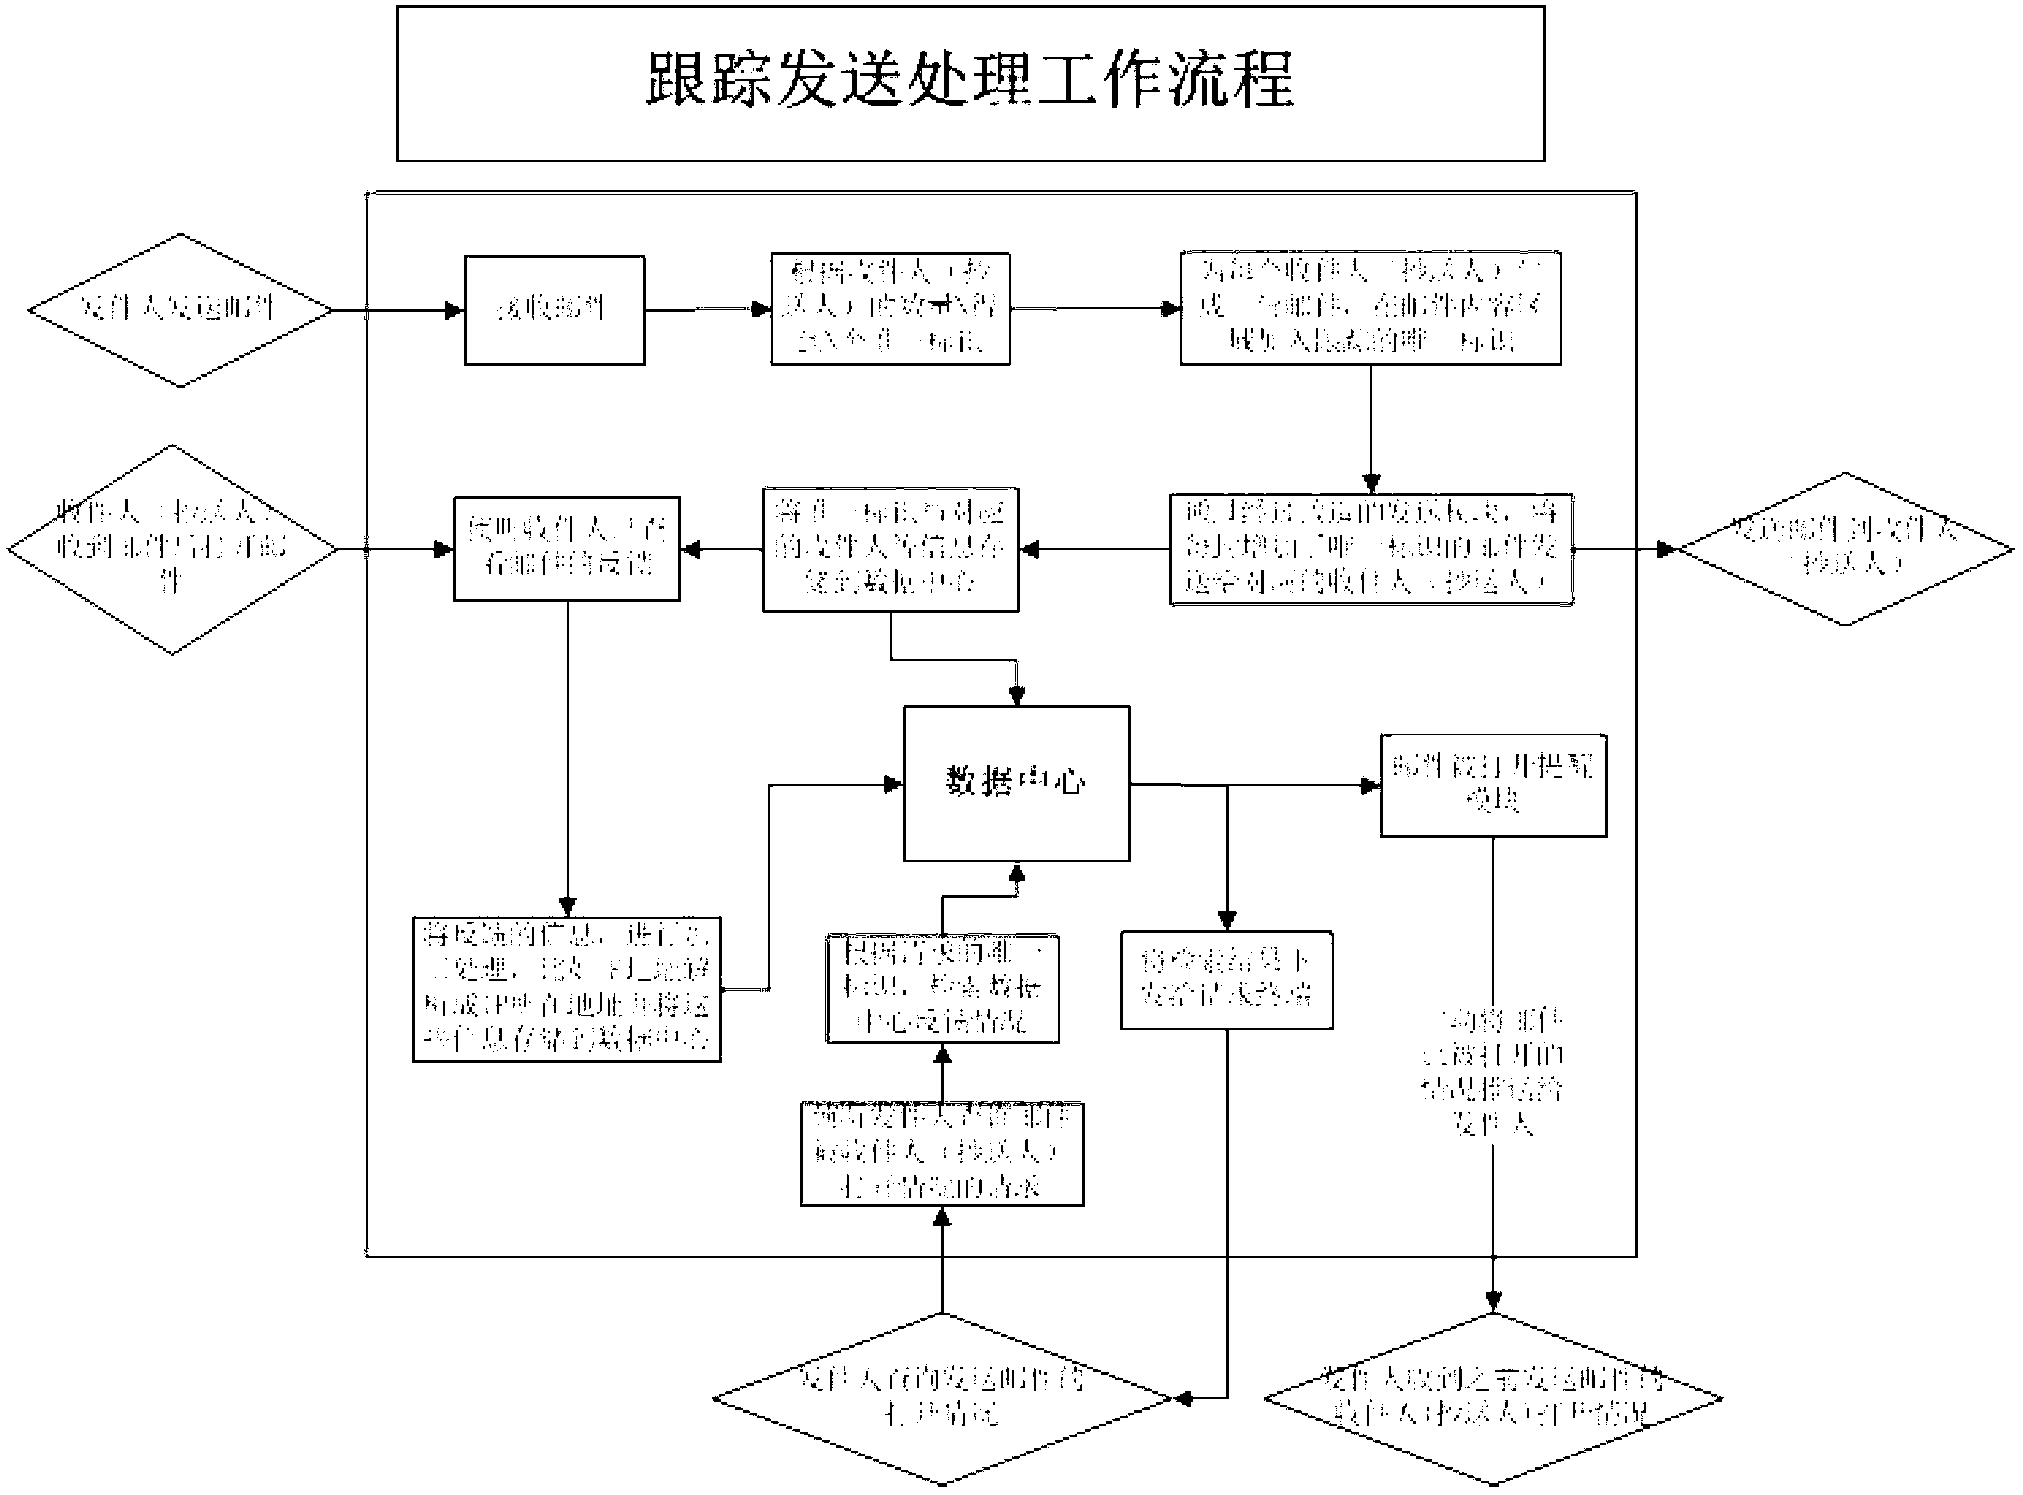 Method and system for tracking operation of each email receiver over email